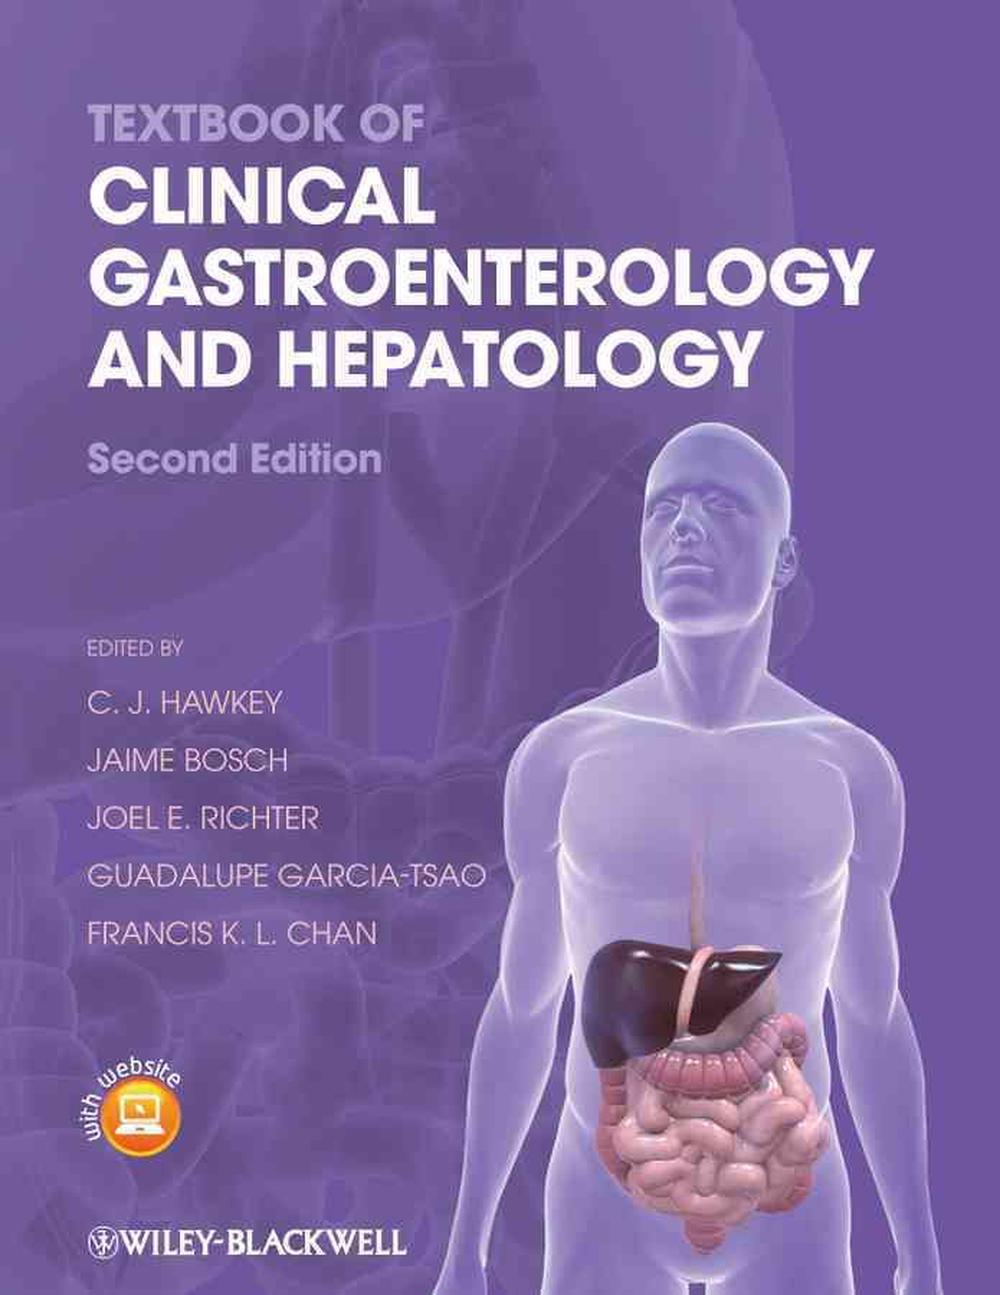 Textbook Of Clinical Gastroenterology And Hepatology By C J Hawkey English Ha Ebay